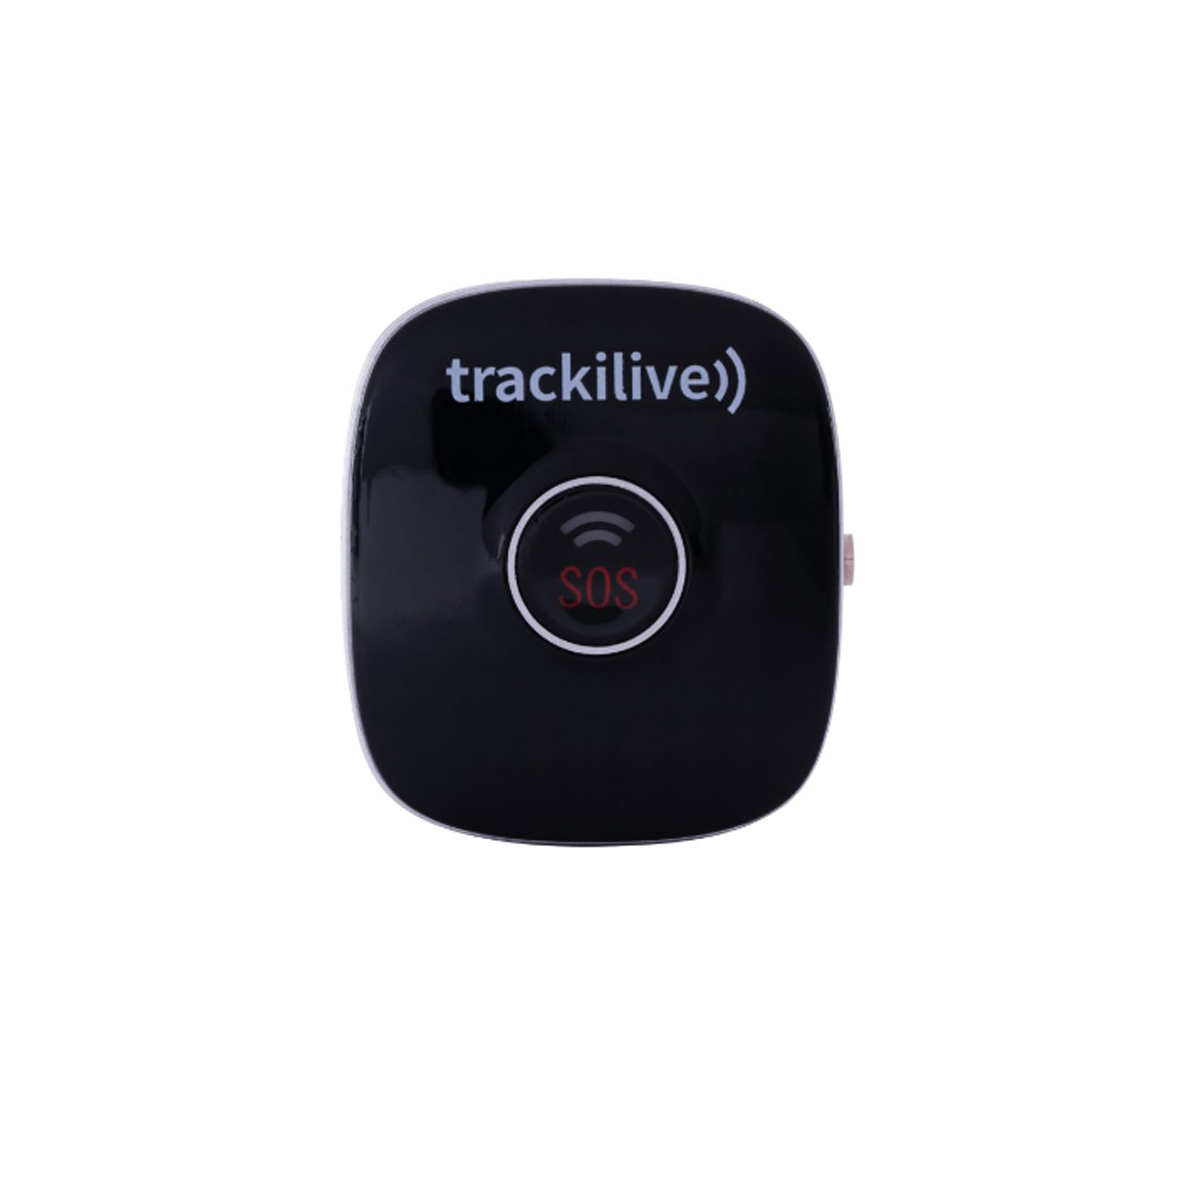 TRACKILIVE 4G TL-10 Outdoor